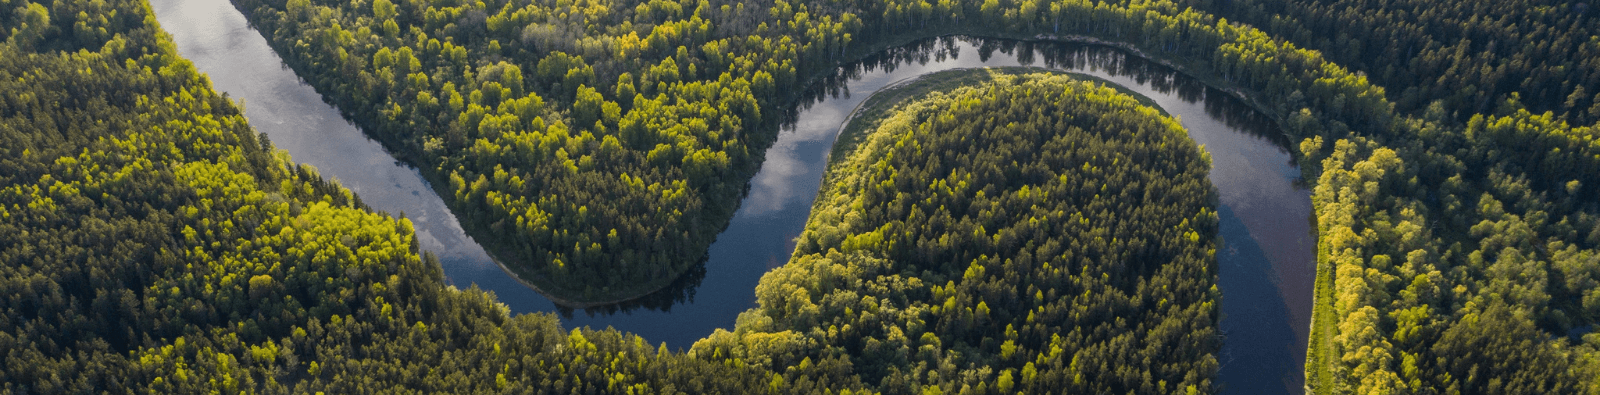 Calm river winds through the woods